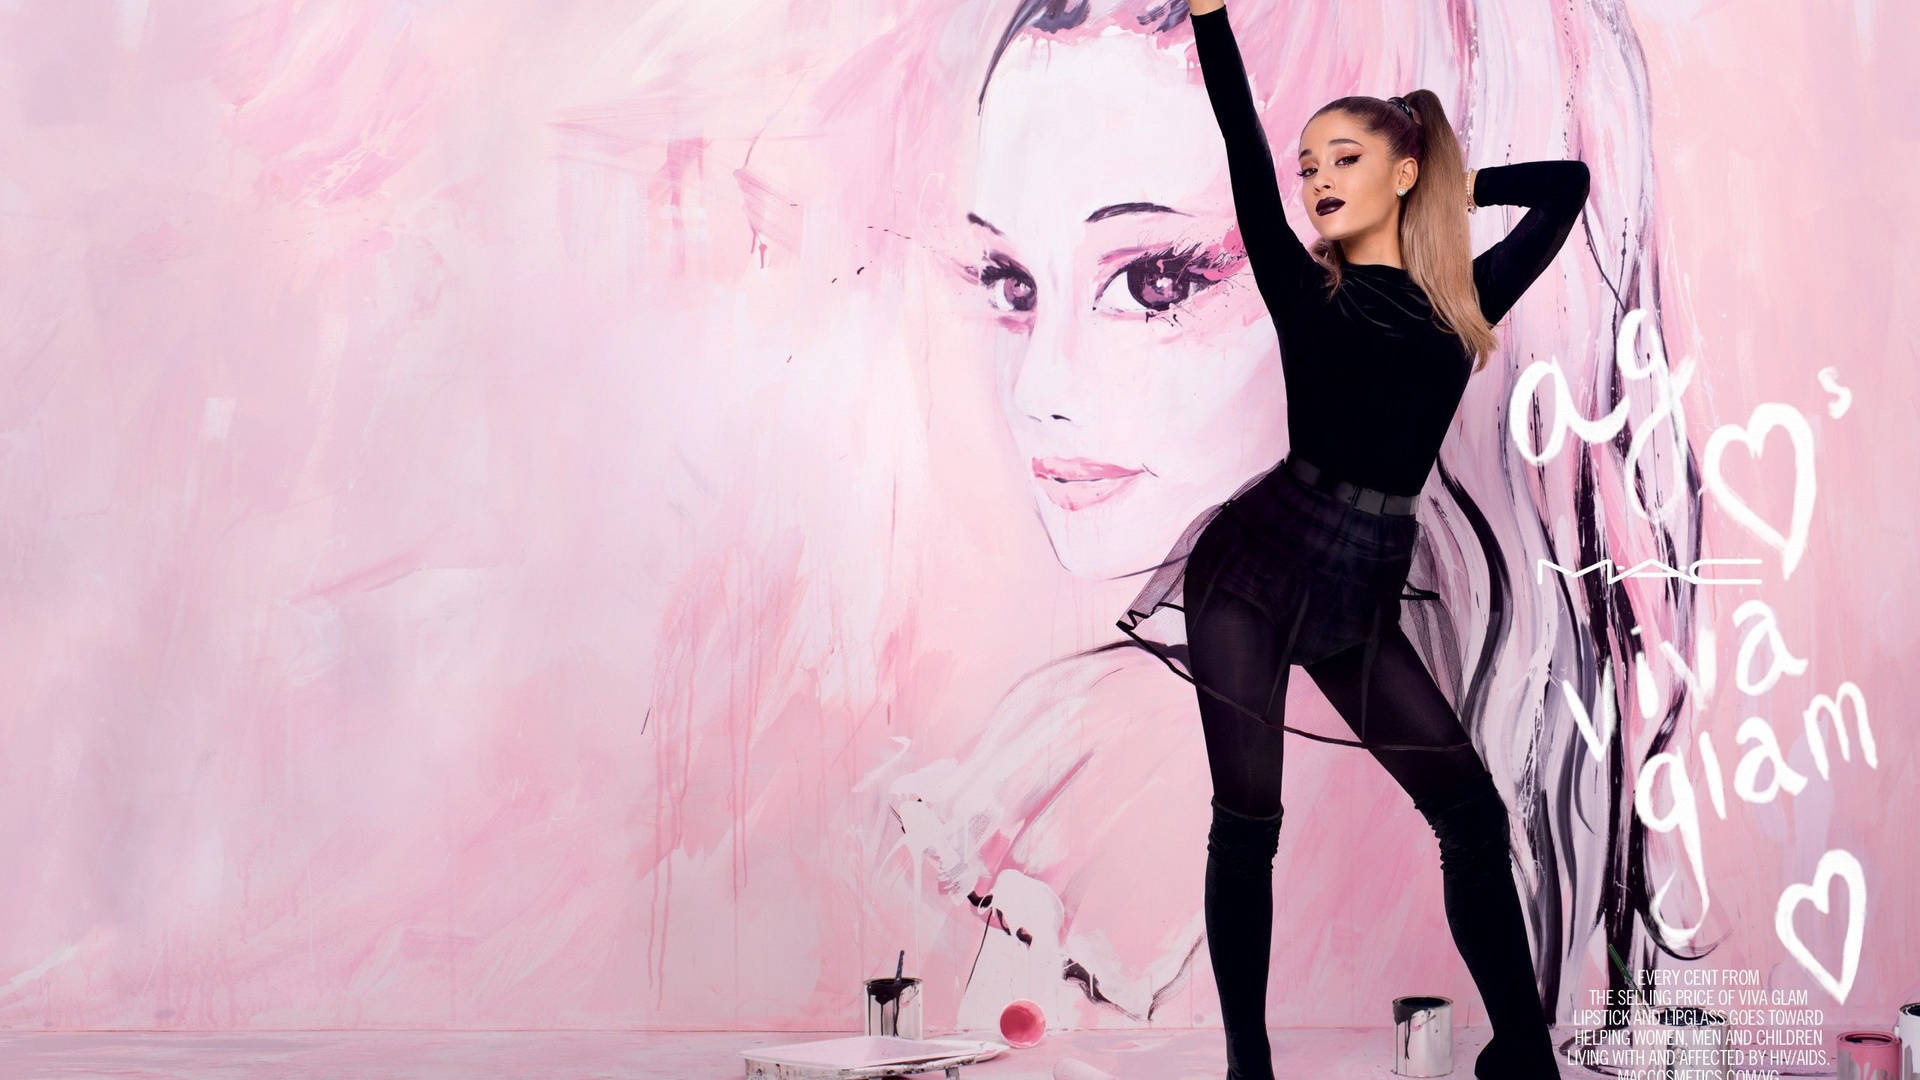 2560X1440 Ariana Grande Wallpaper and Background